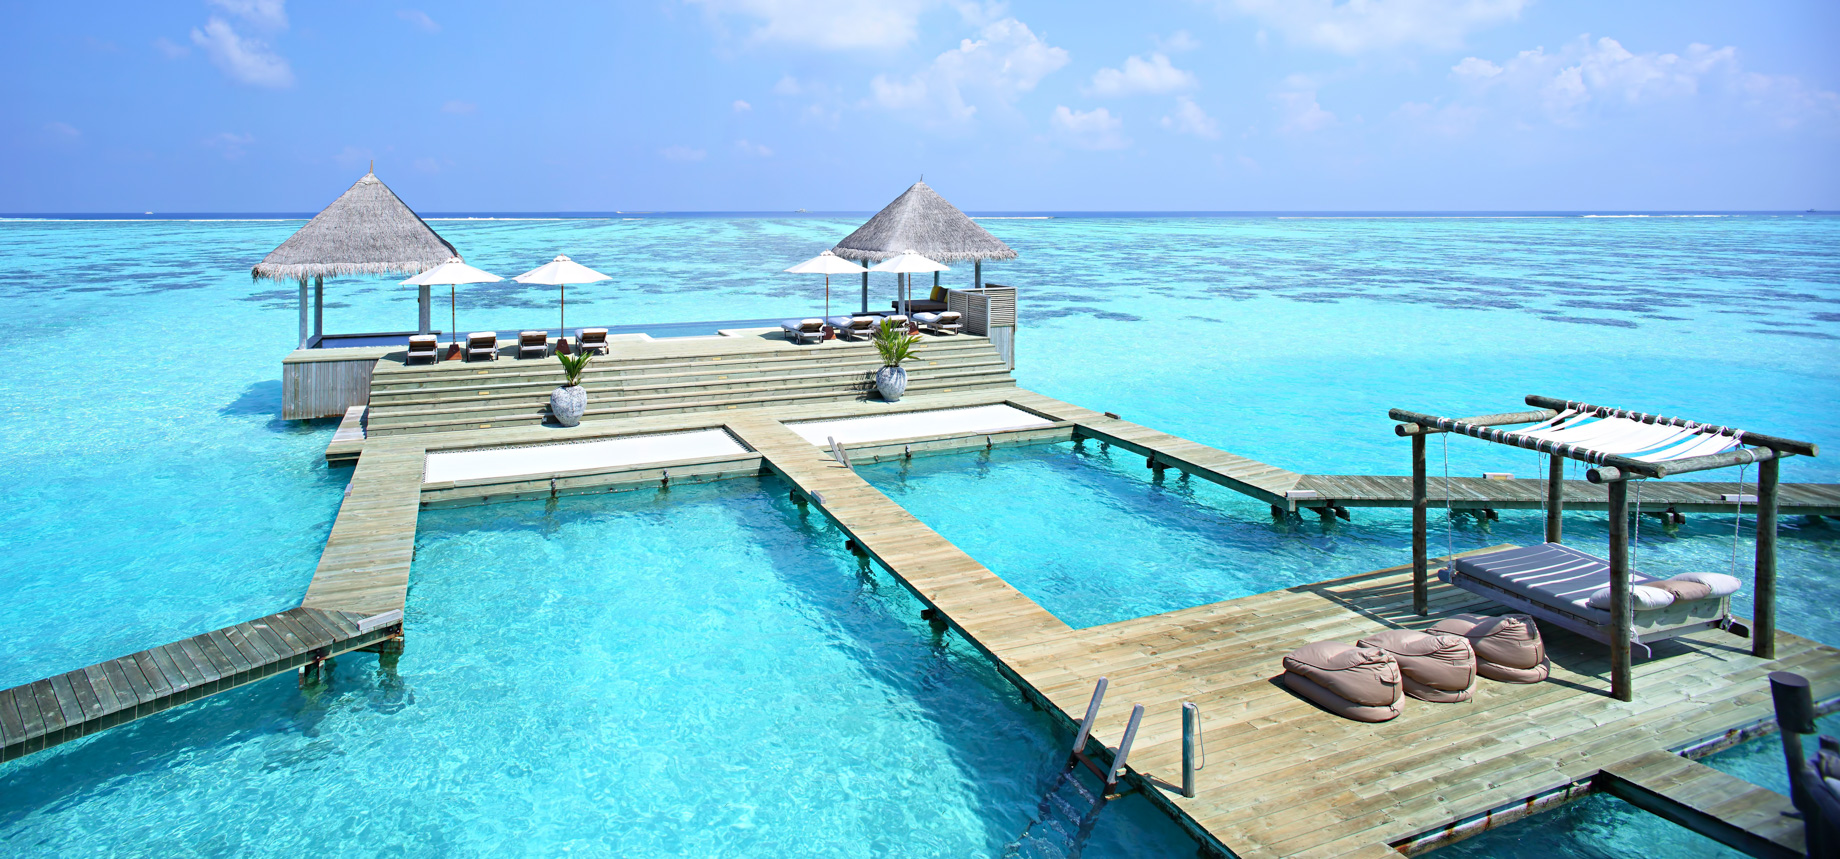 Gili Lankanfushi Resort – North Male Atoll, Maldives – The Private Reserve Infinity Pool and Day Bed